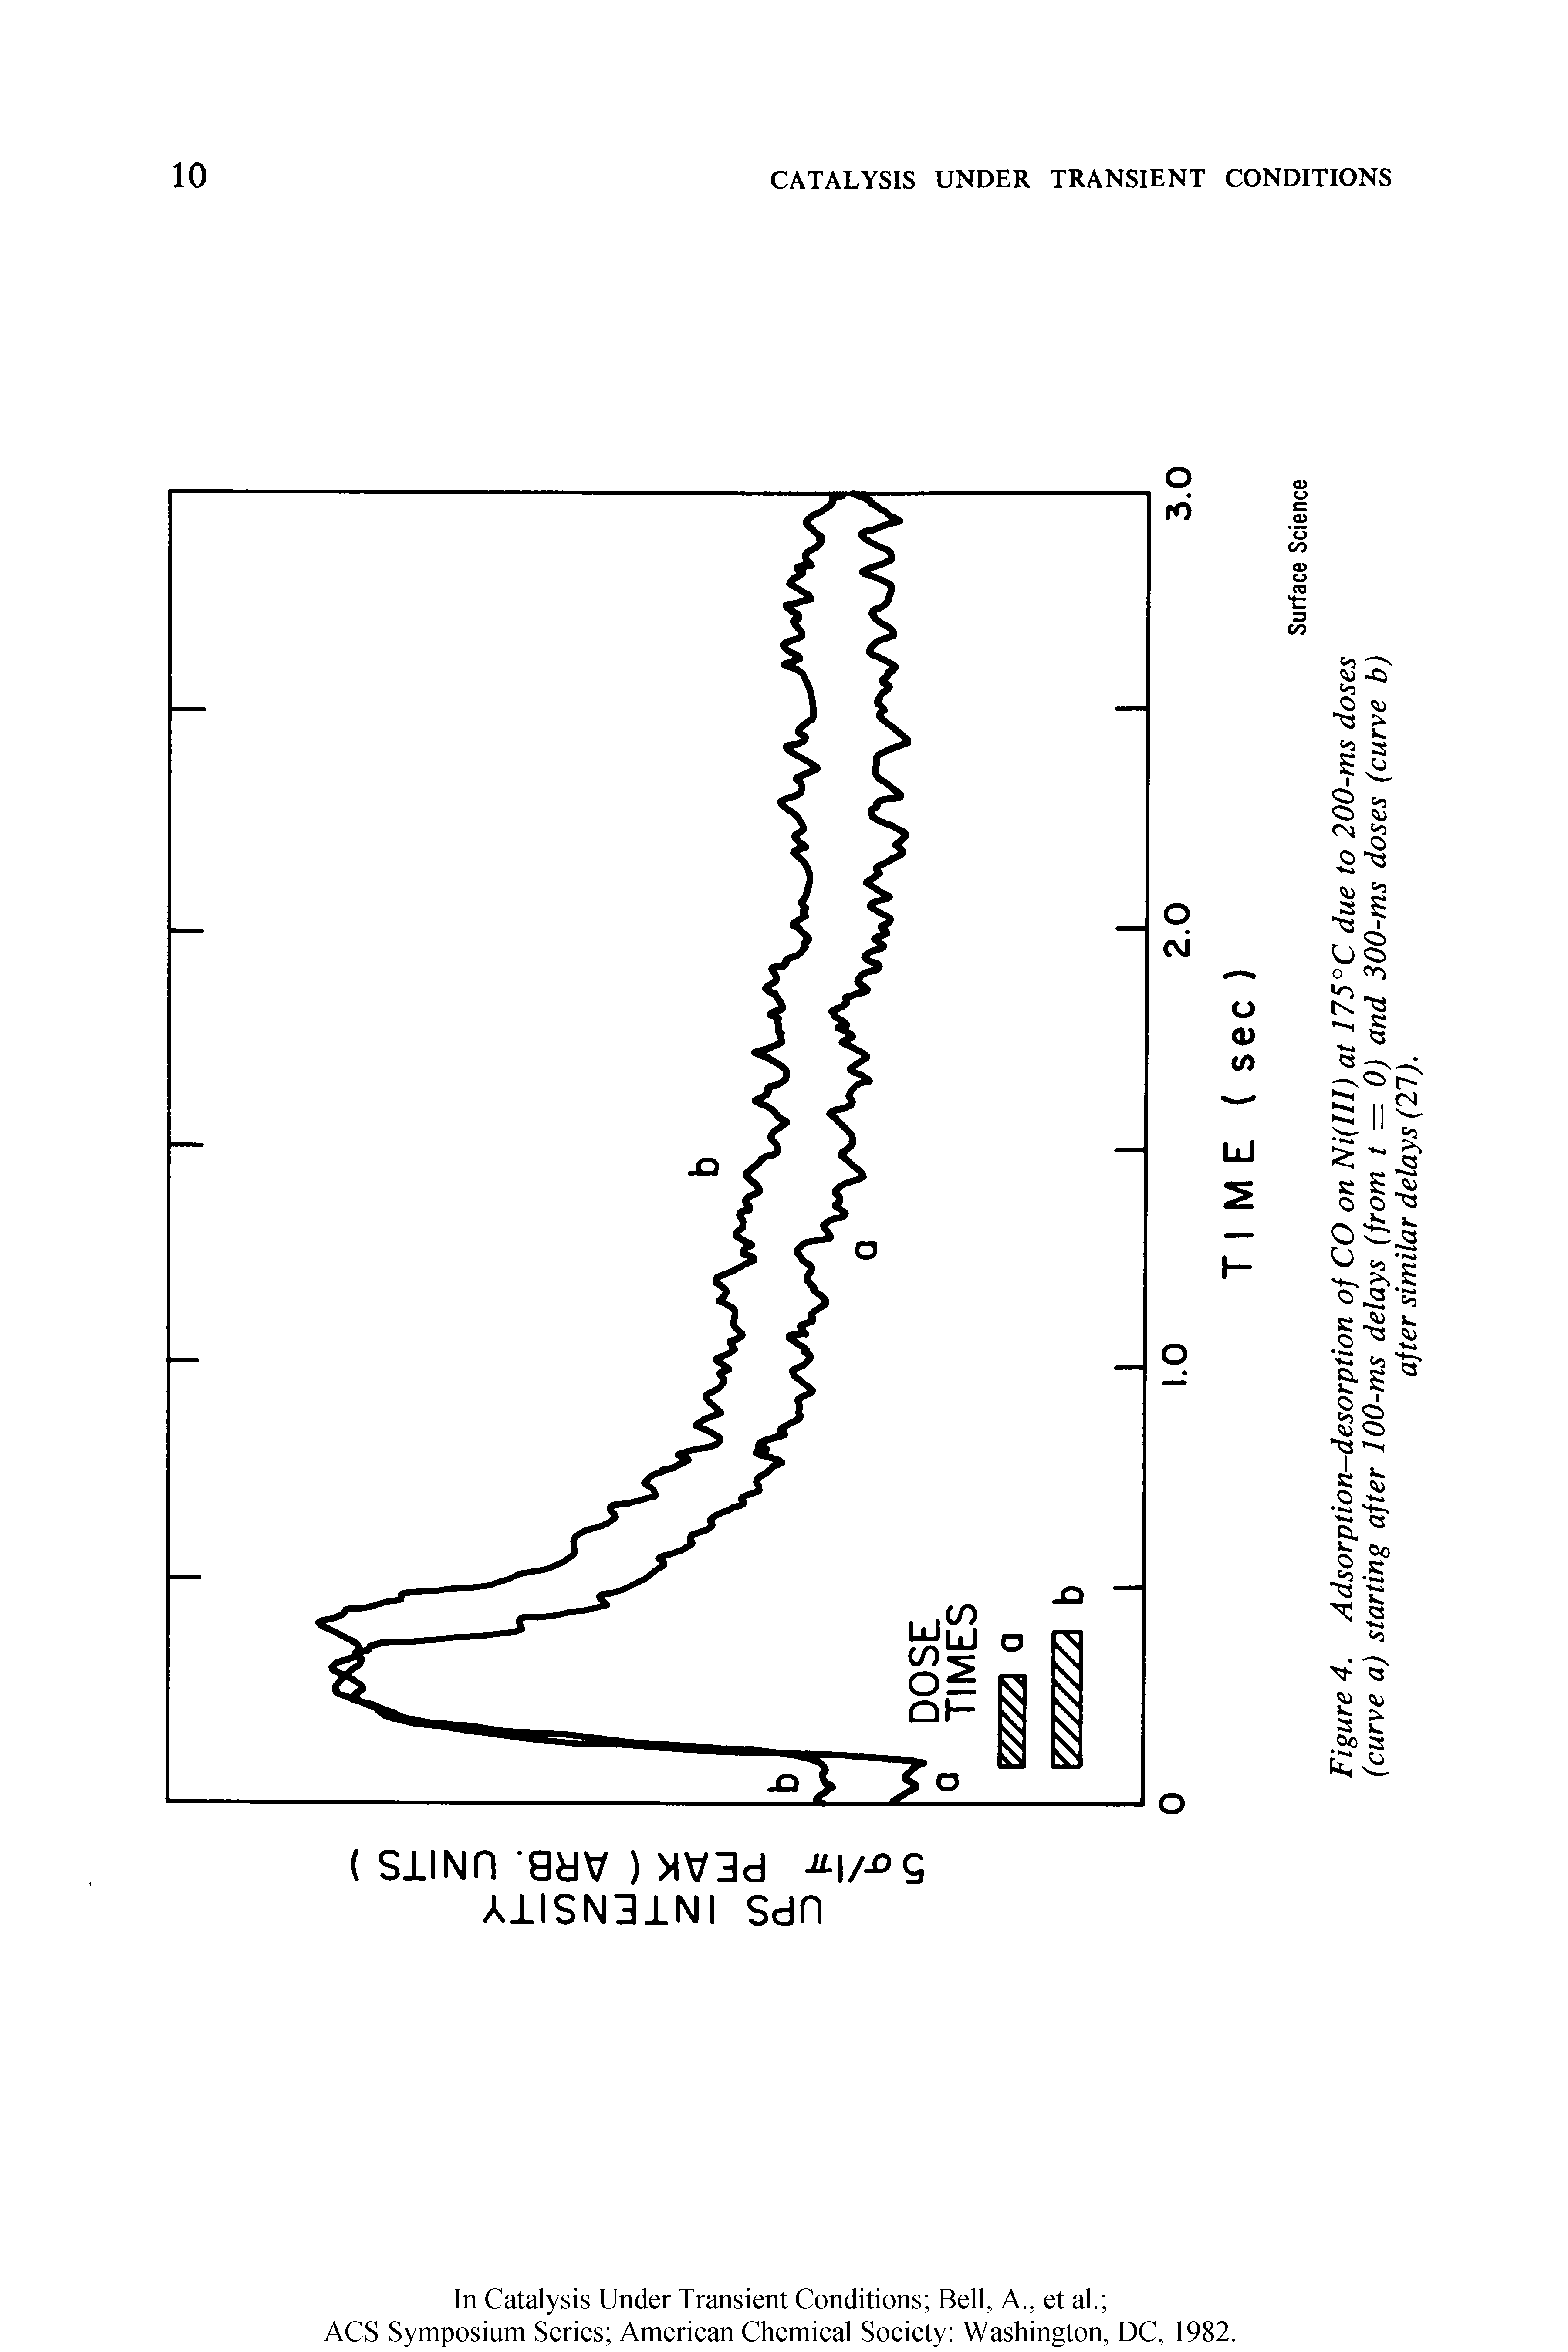 Figure 4. Adsorption-desorption of CO on Ni(III) at 175°C due to 200-ms doses (curve a) starting after 100-ms delays (from t = 0) and 300-ms doses (curve b)...